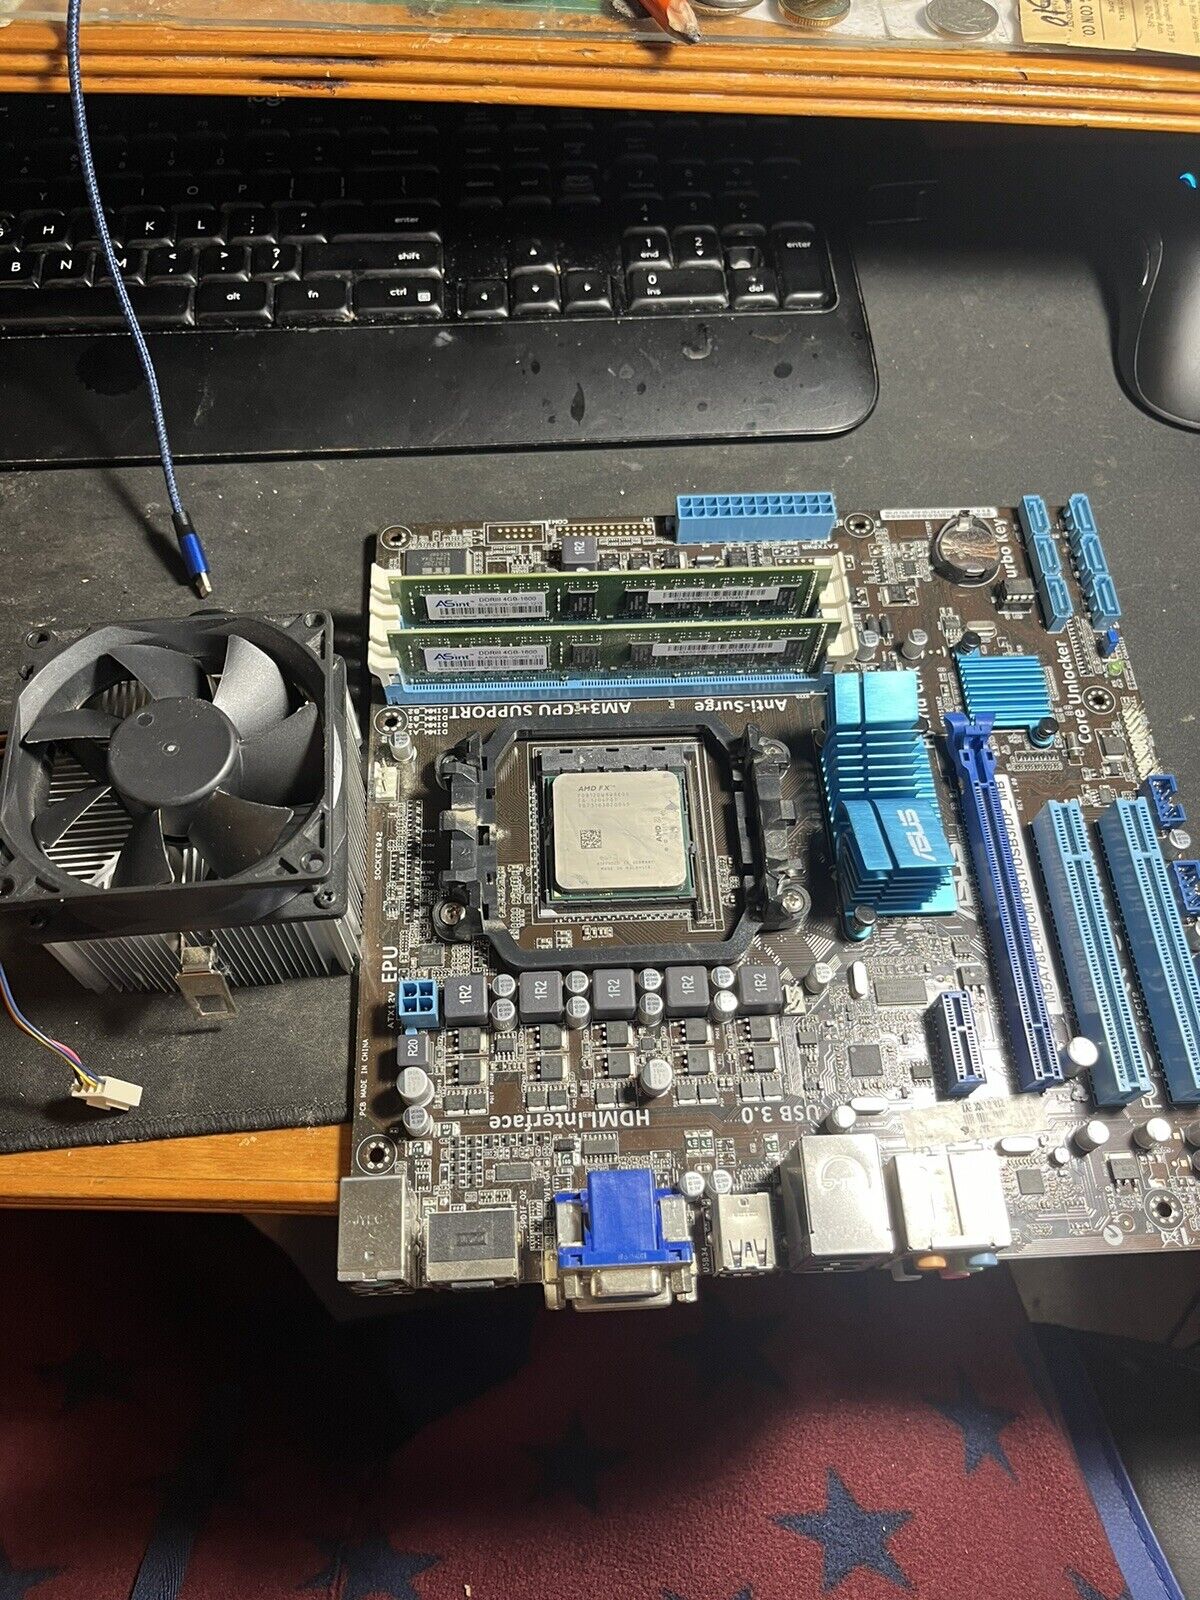 Asus Hybrid CFX M5A78L-M/USB3 Motherboard Used with a AMD FX-Series FX-8120 8 GB